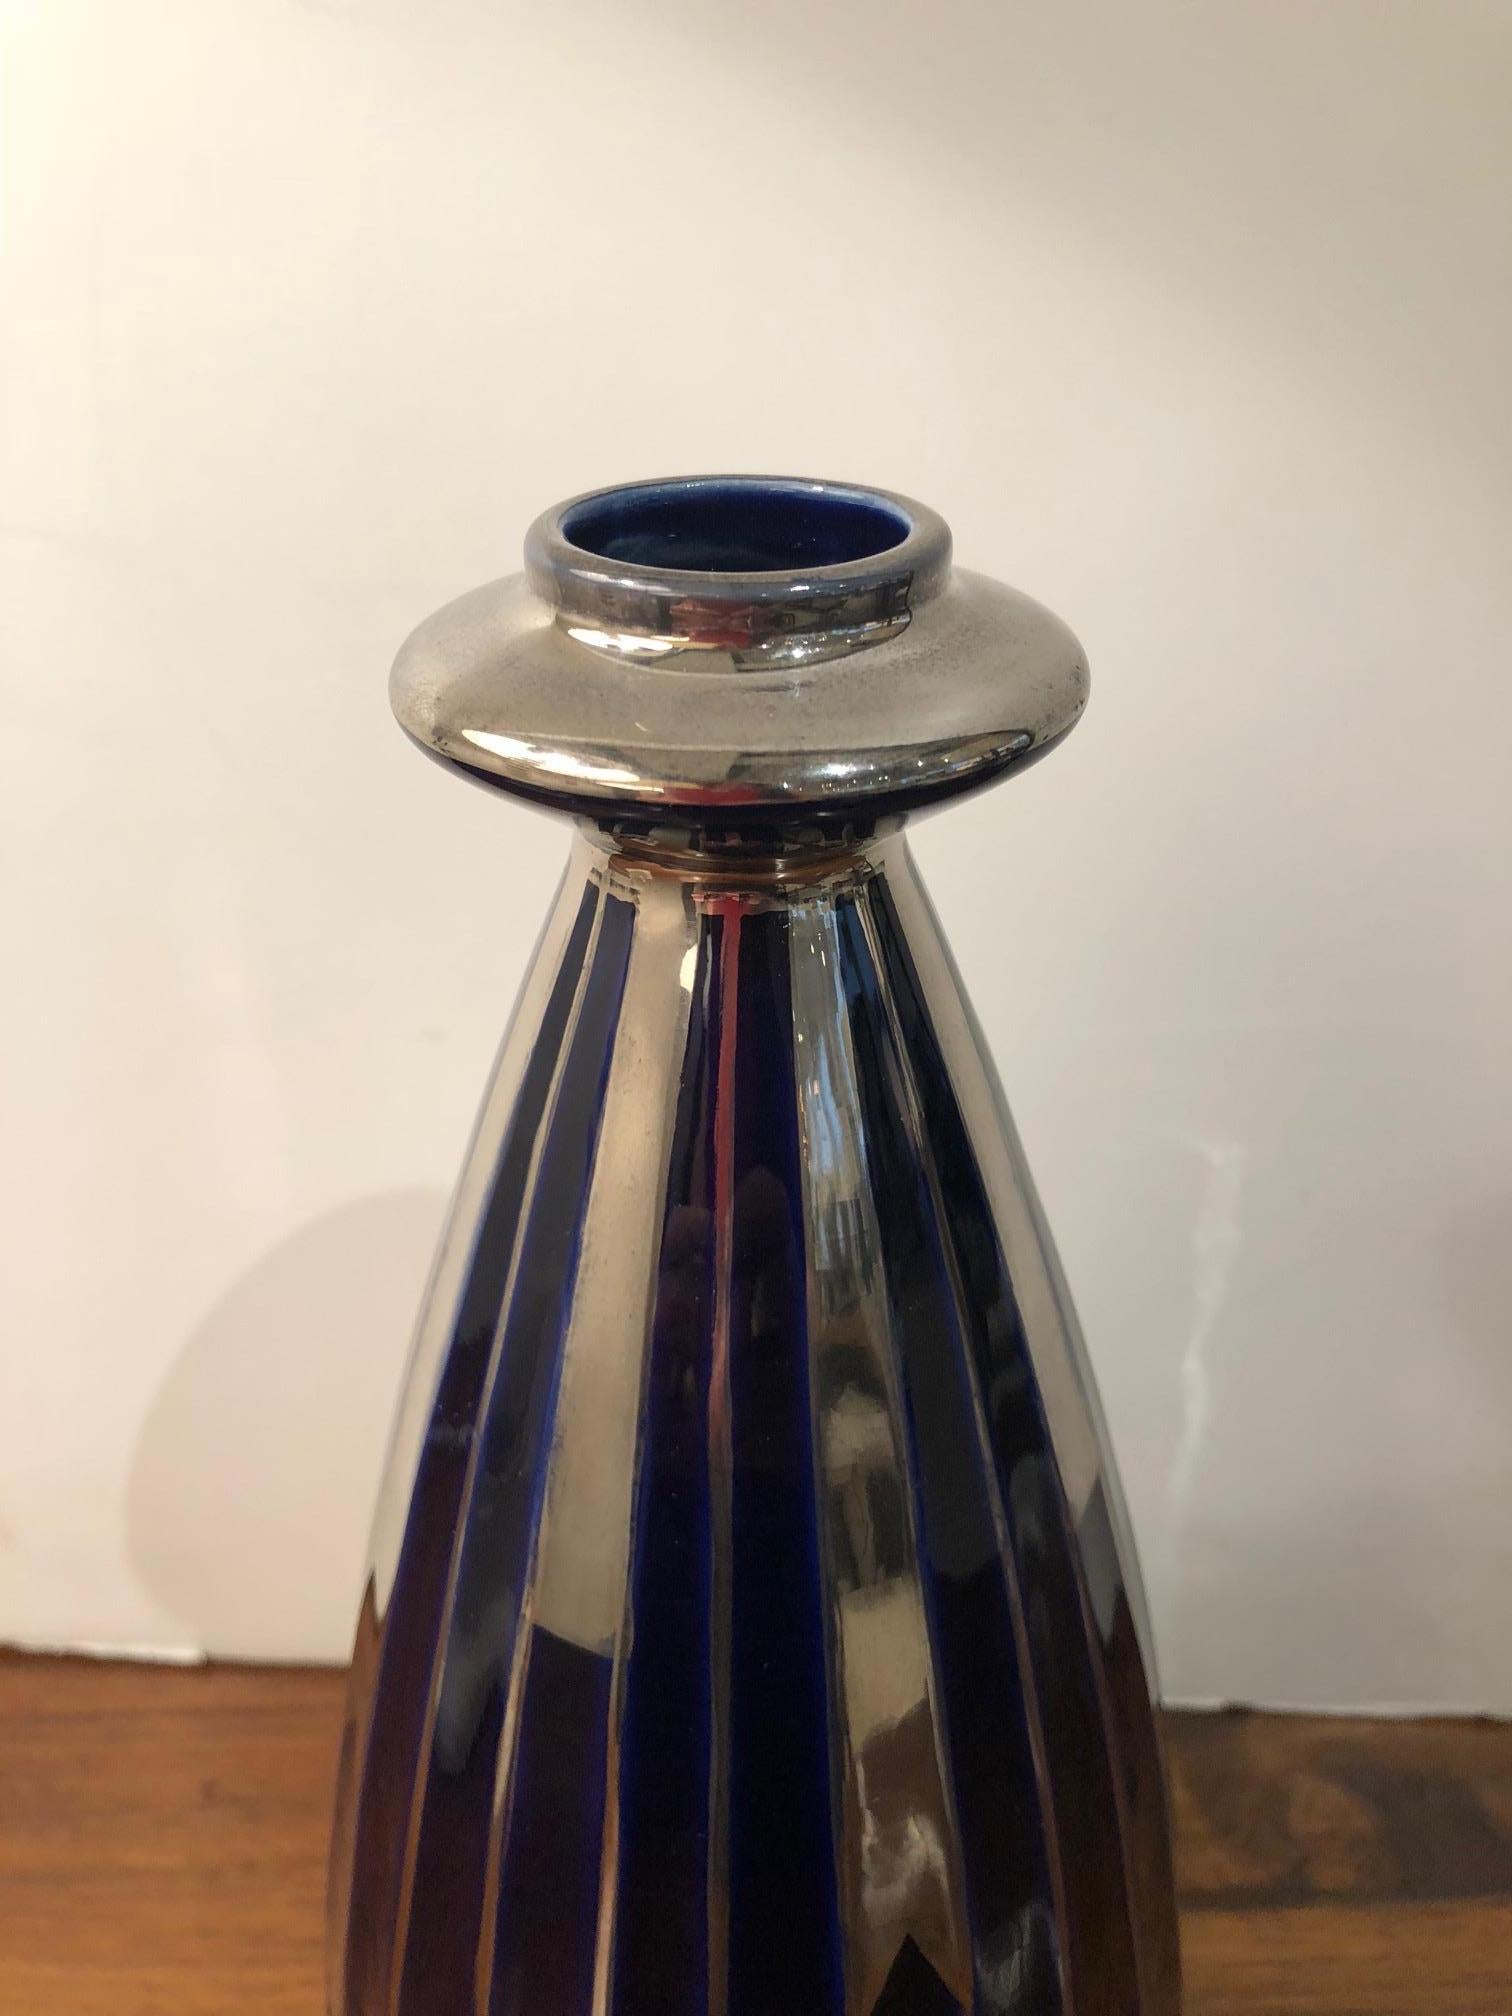 Signed porcelain navy blue and silver Art Deco faceted vase.

Available to see in our NYC Showroom 
BK Antiques
306 East 61st St. 2nd fl.
New York, NY 10065